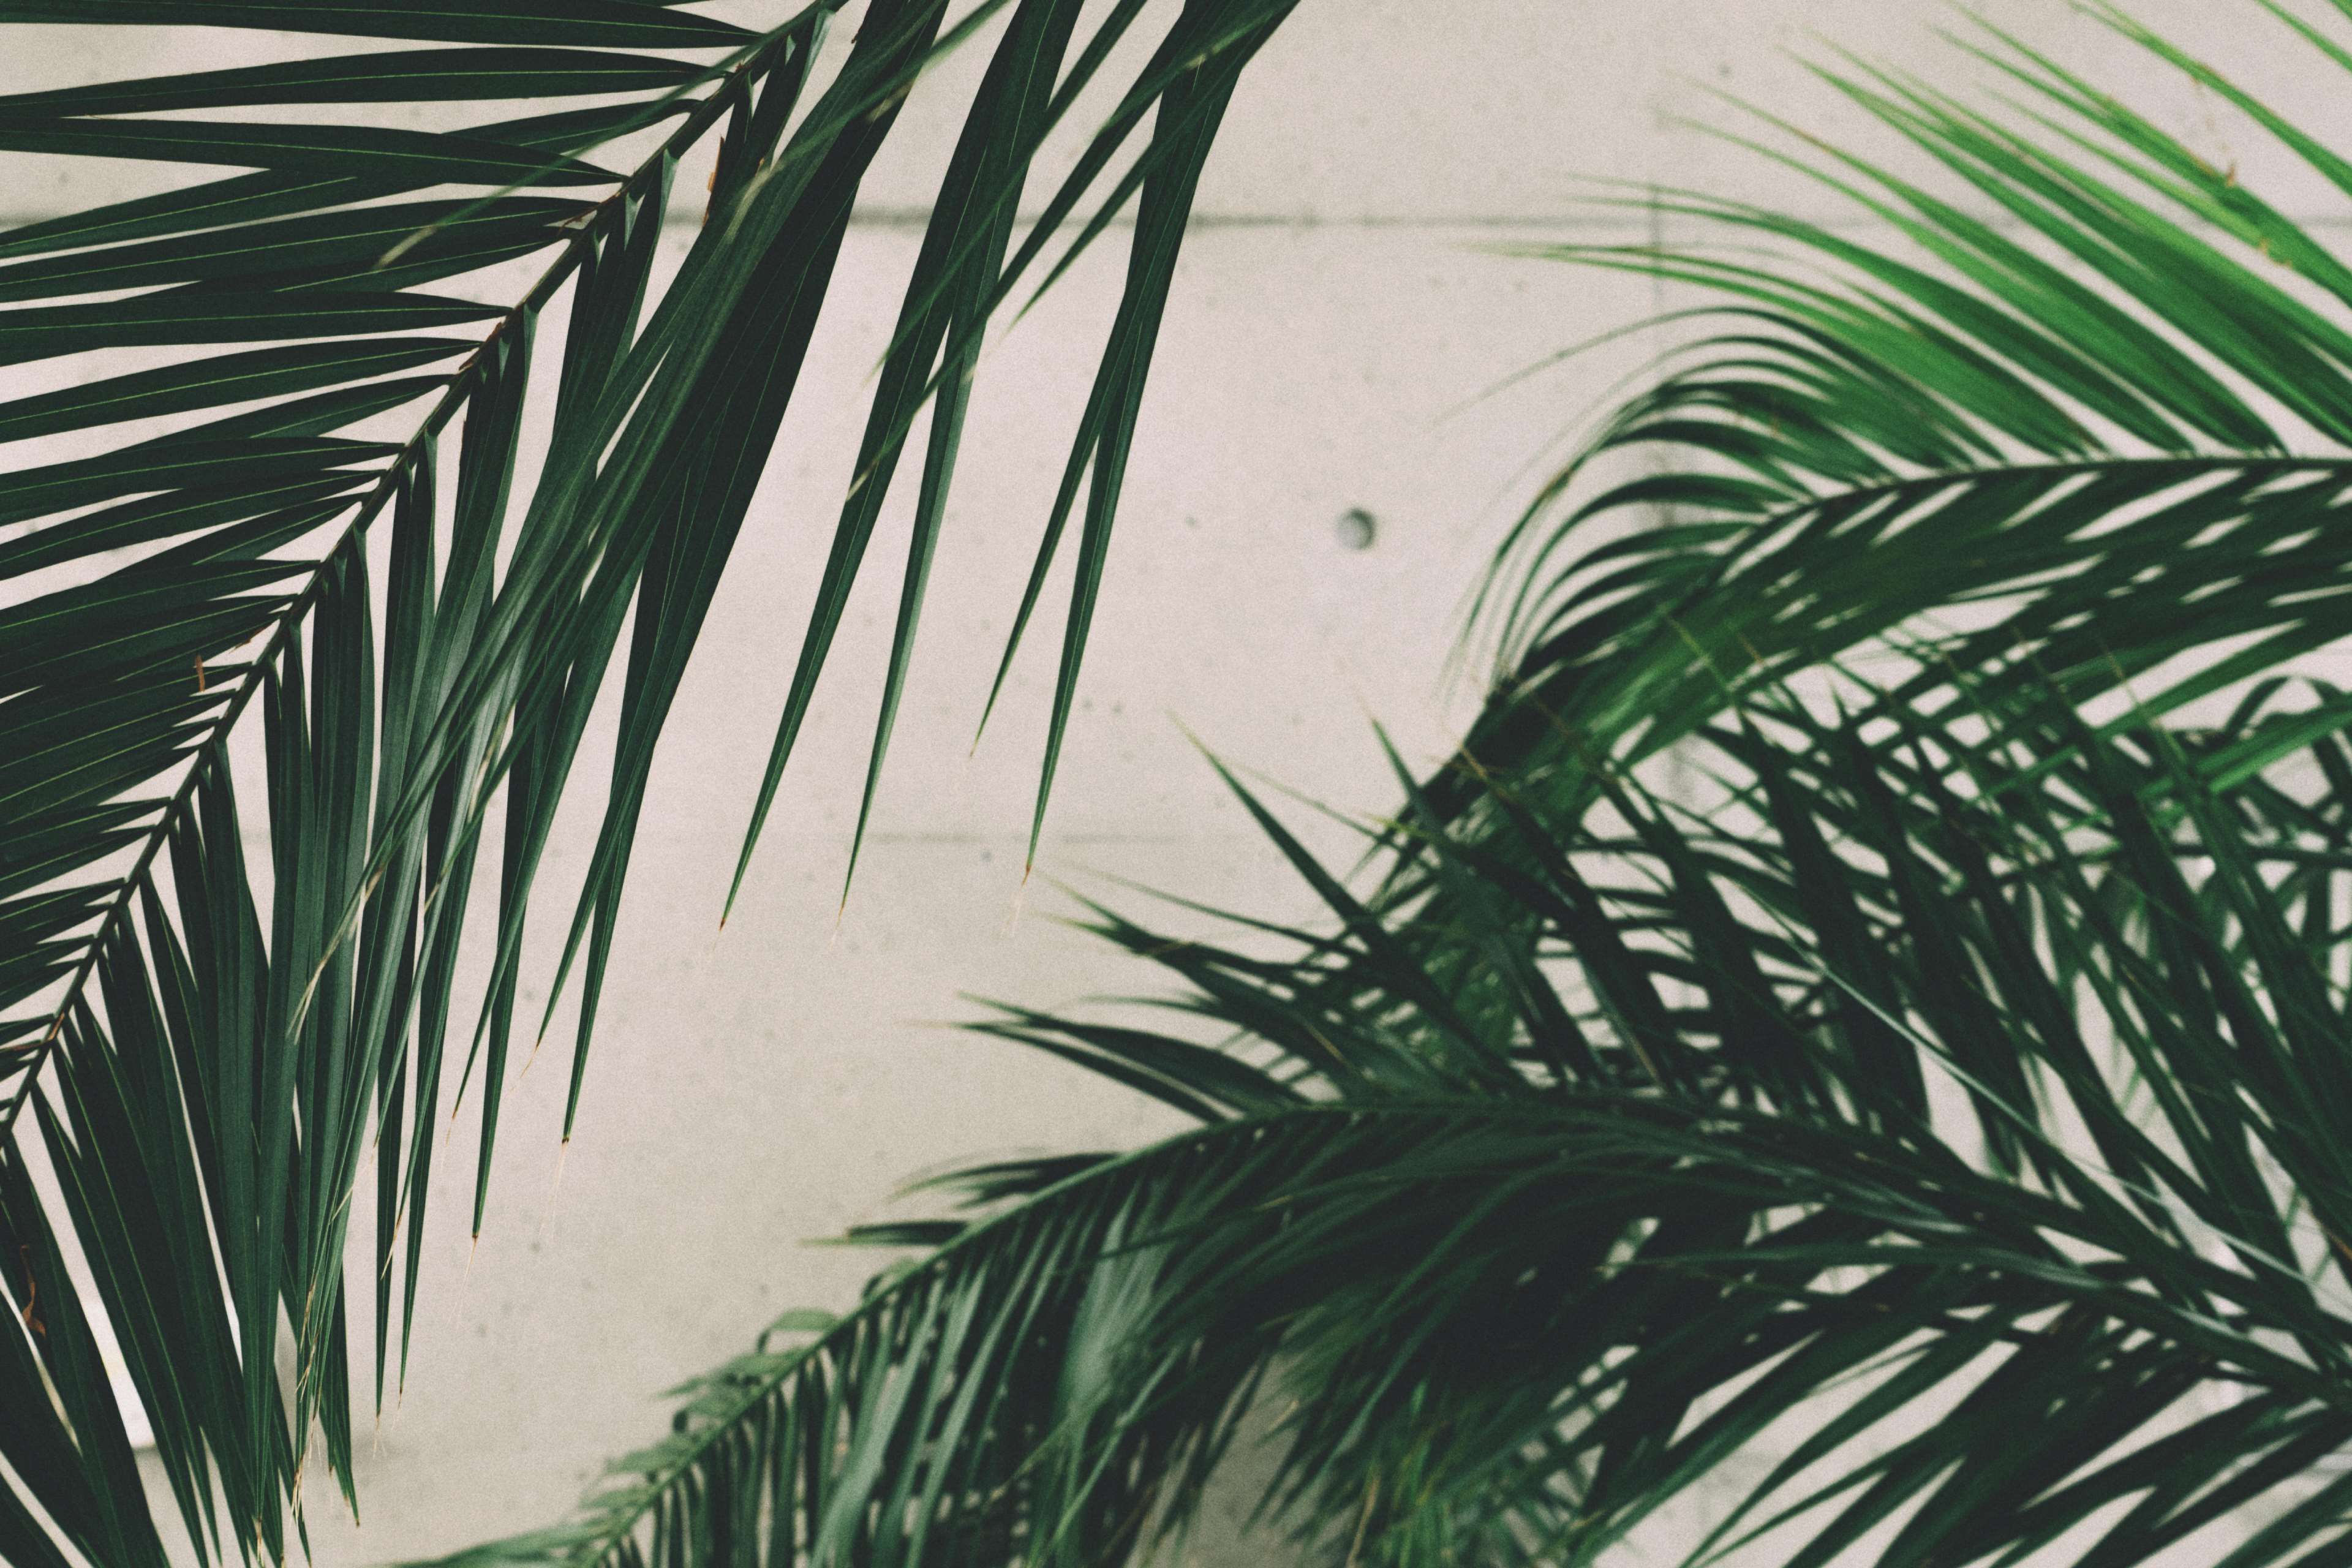 close up, concrete, green, growth, leaves, nature, outdoors, palm